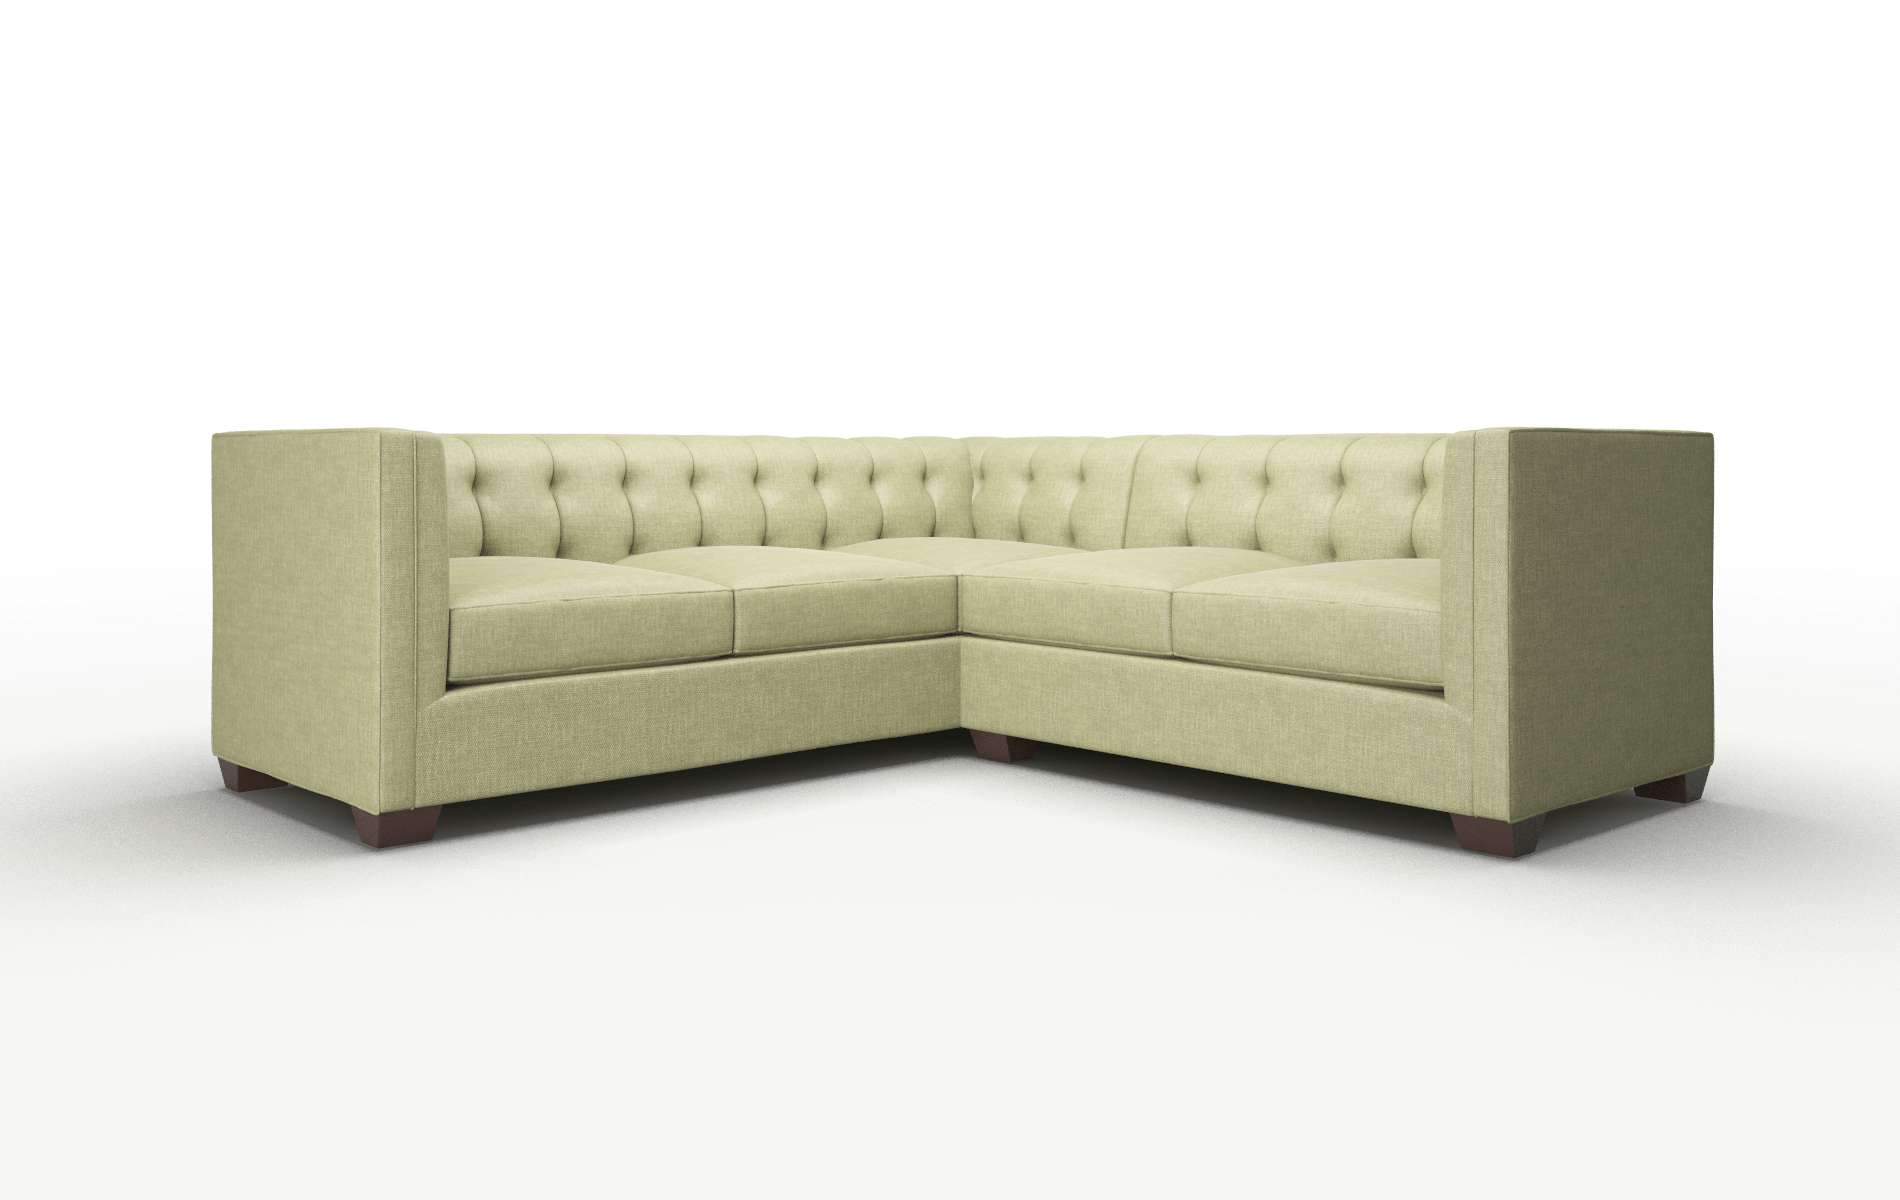 Grant Dream_d Forest Sectional espresso legs 1